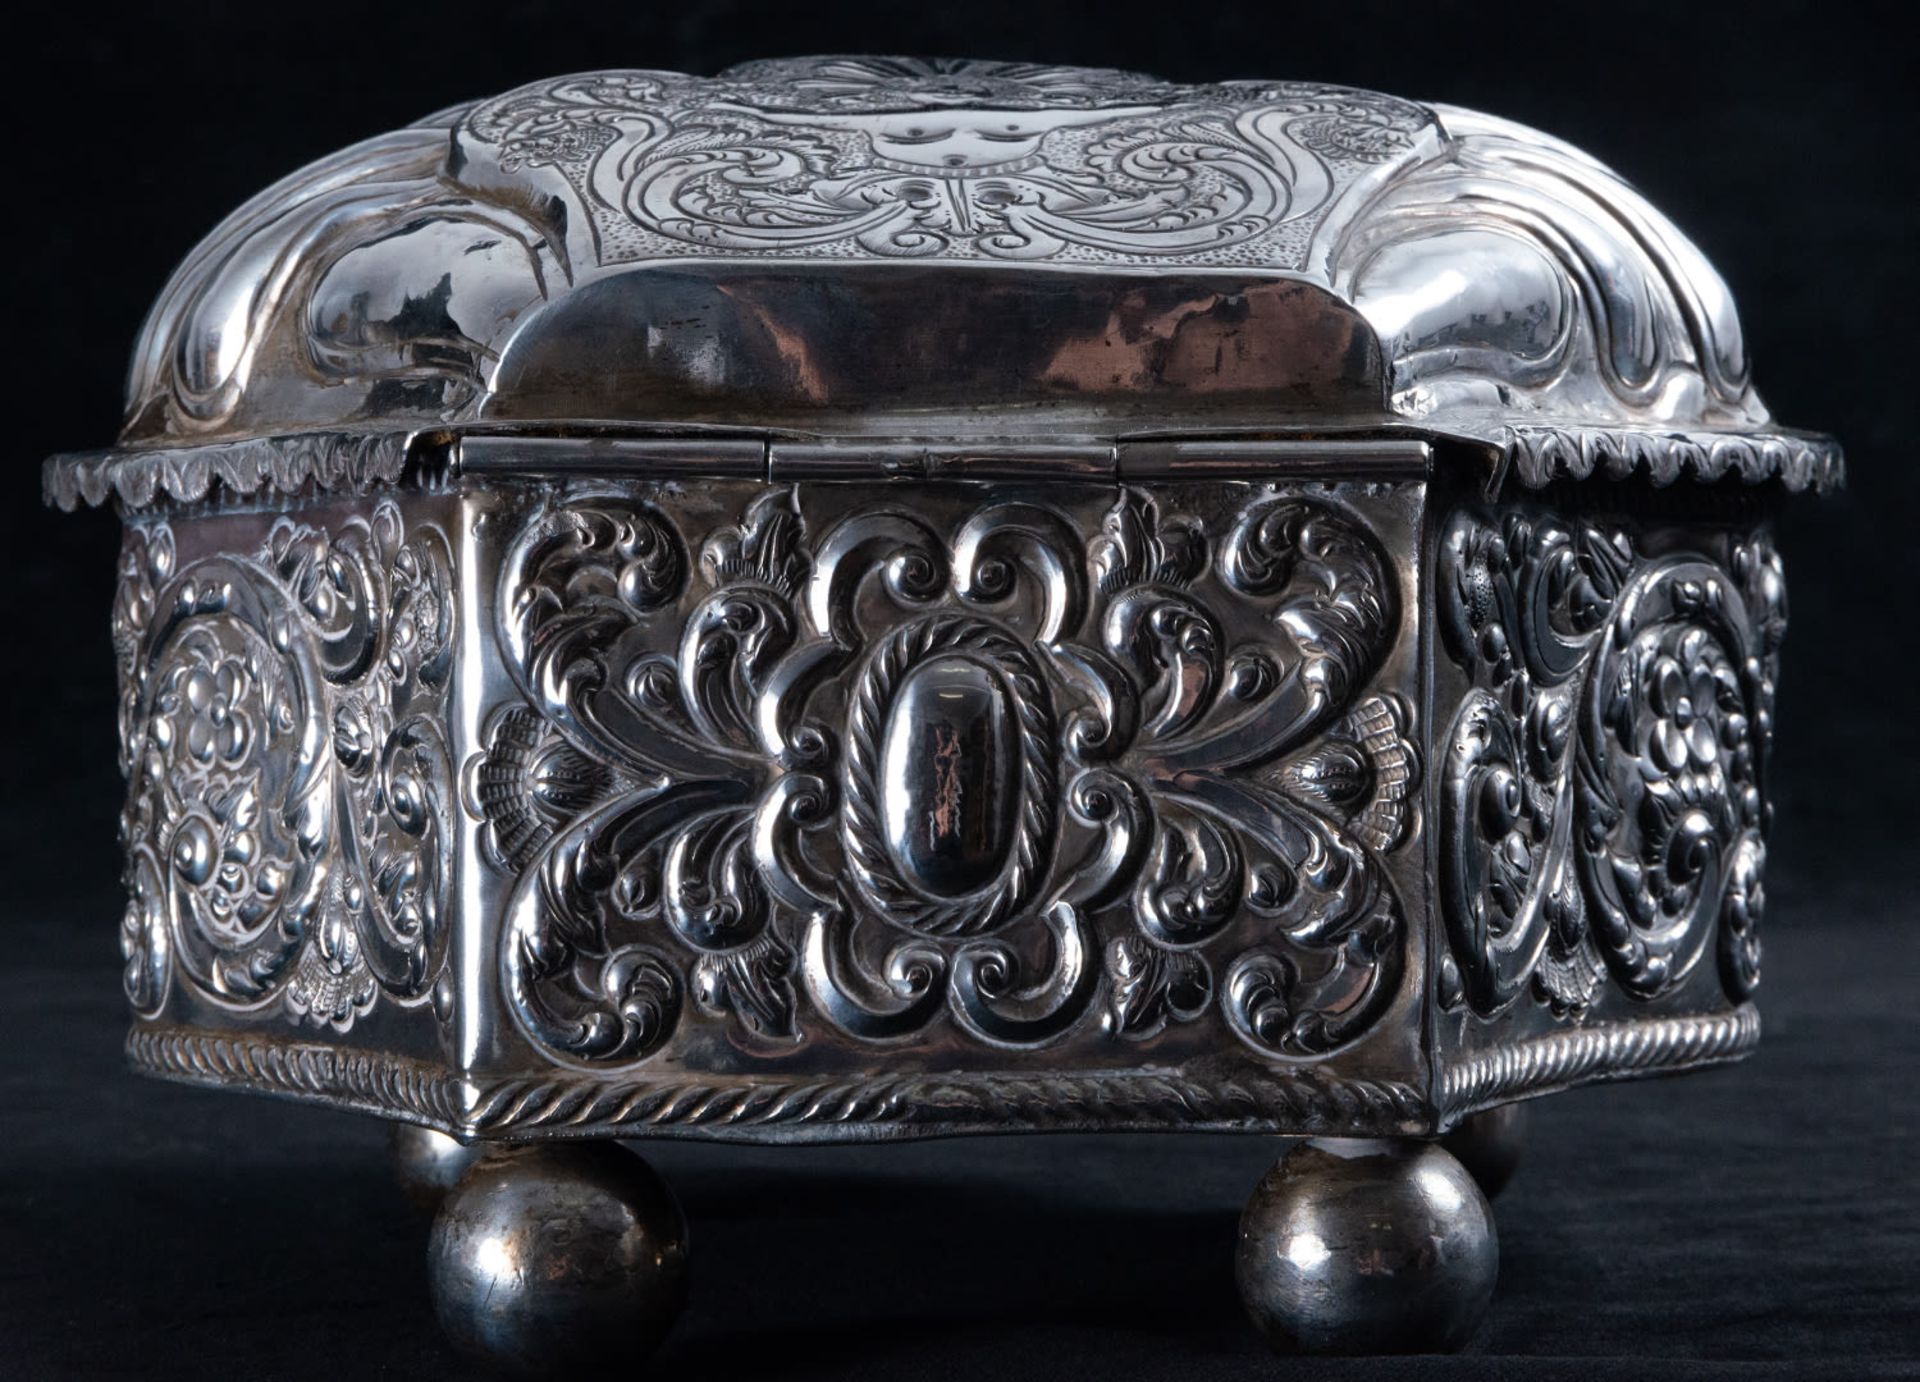 Exceptional Coquera in silver, colonial work, Cuzco, Peru, 18th century - Image 6 of 8